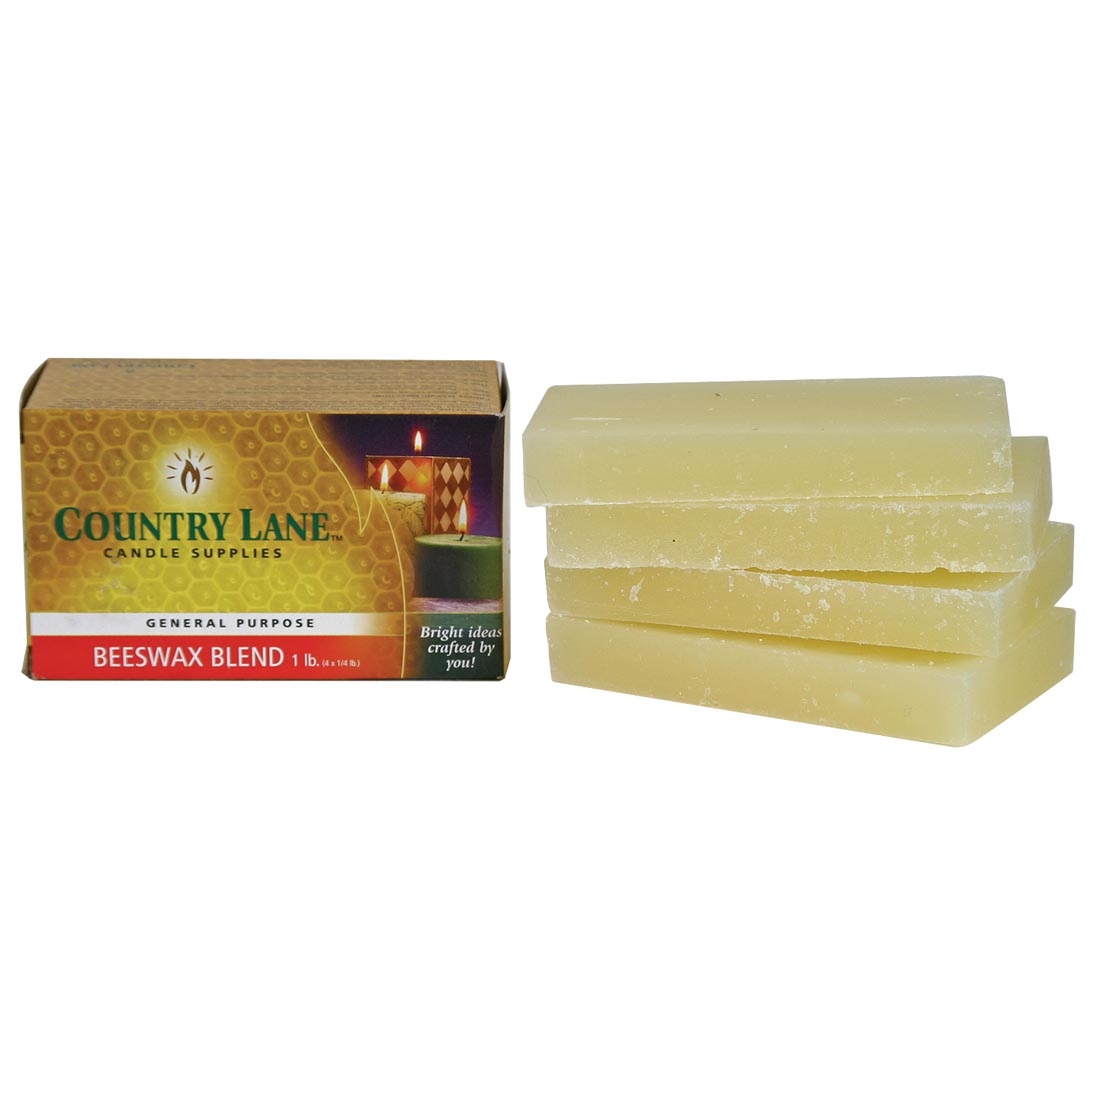 County Lane Beeswax Blend